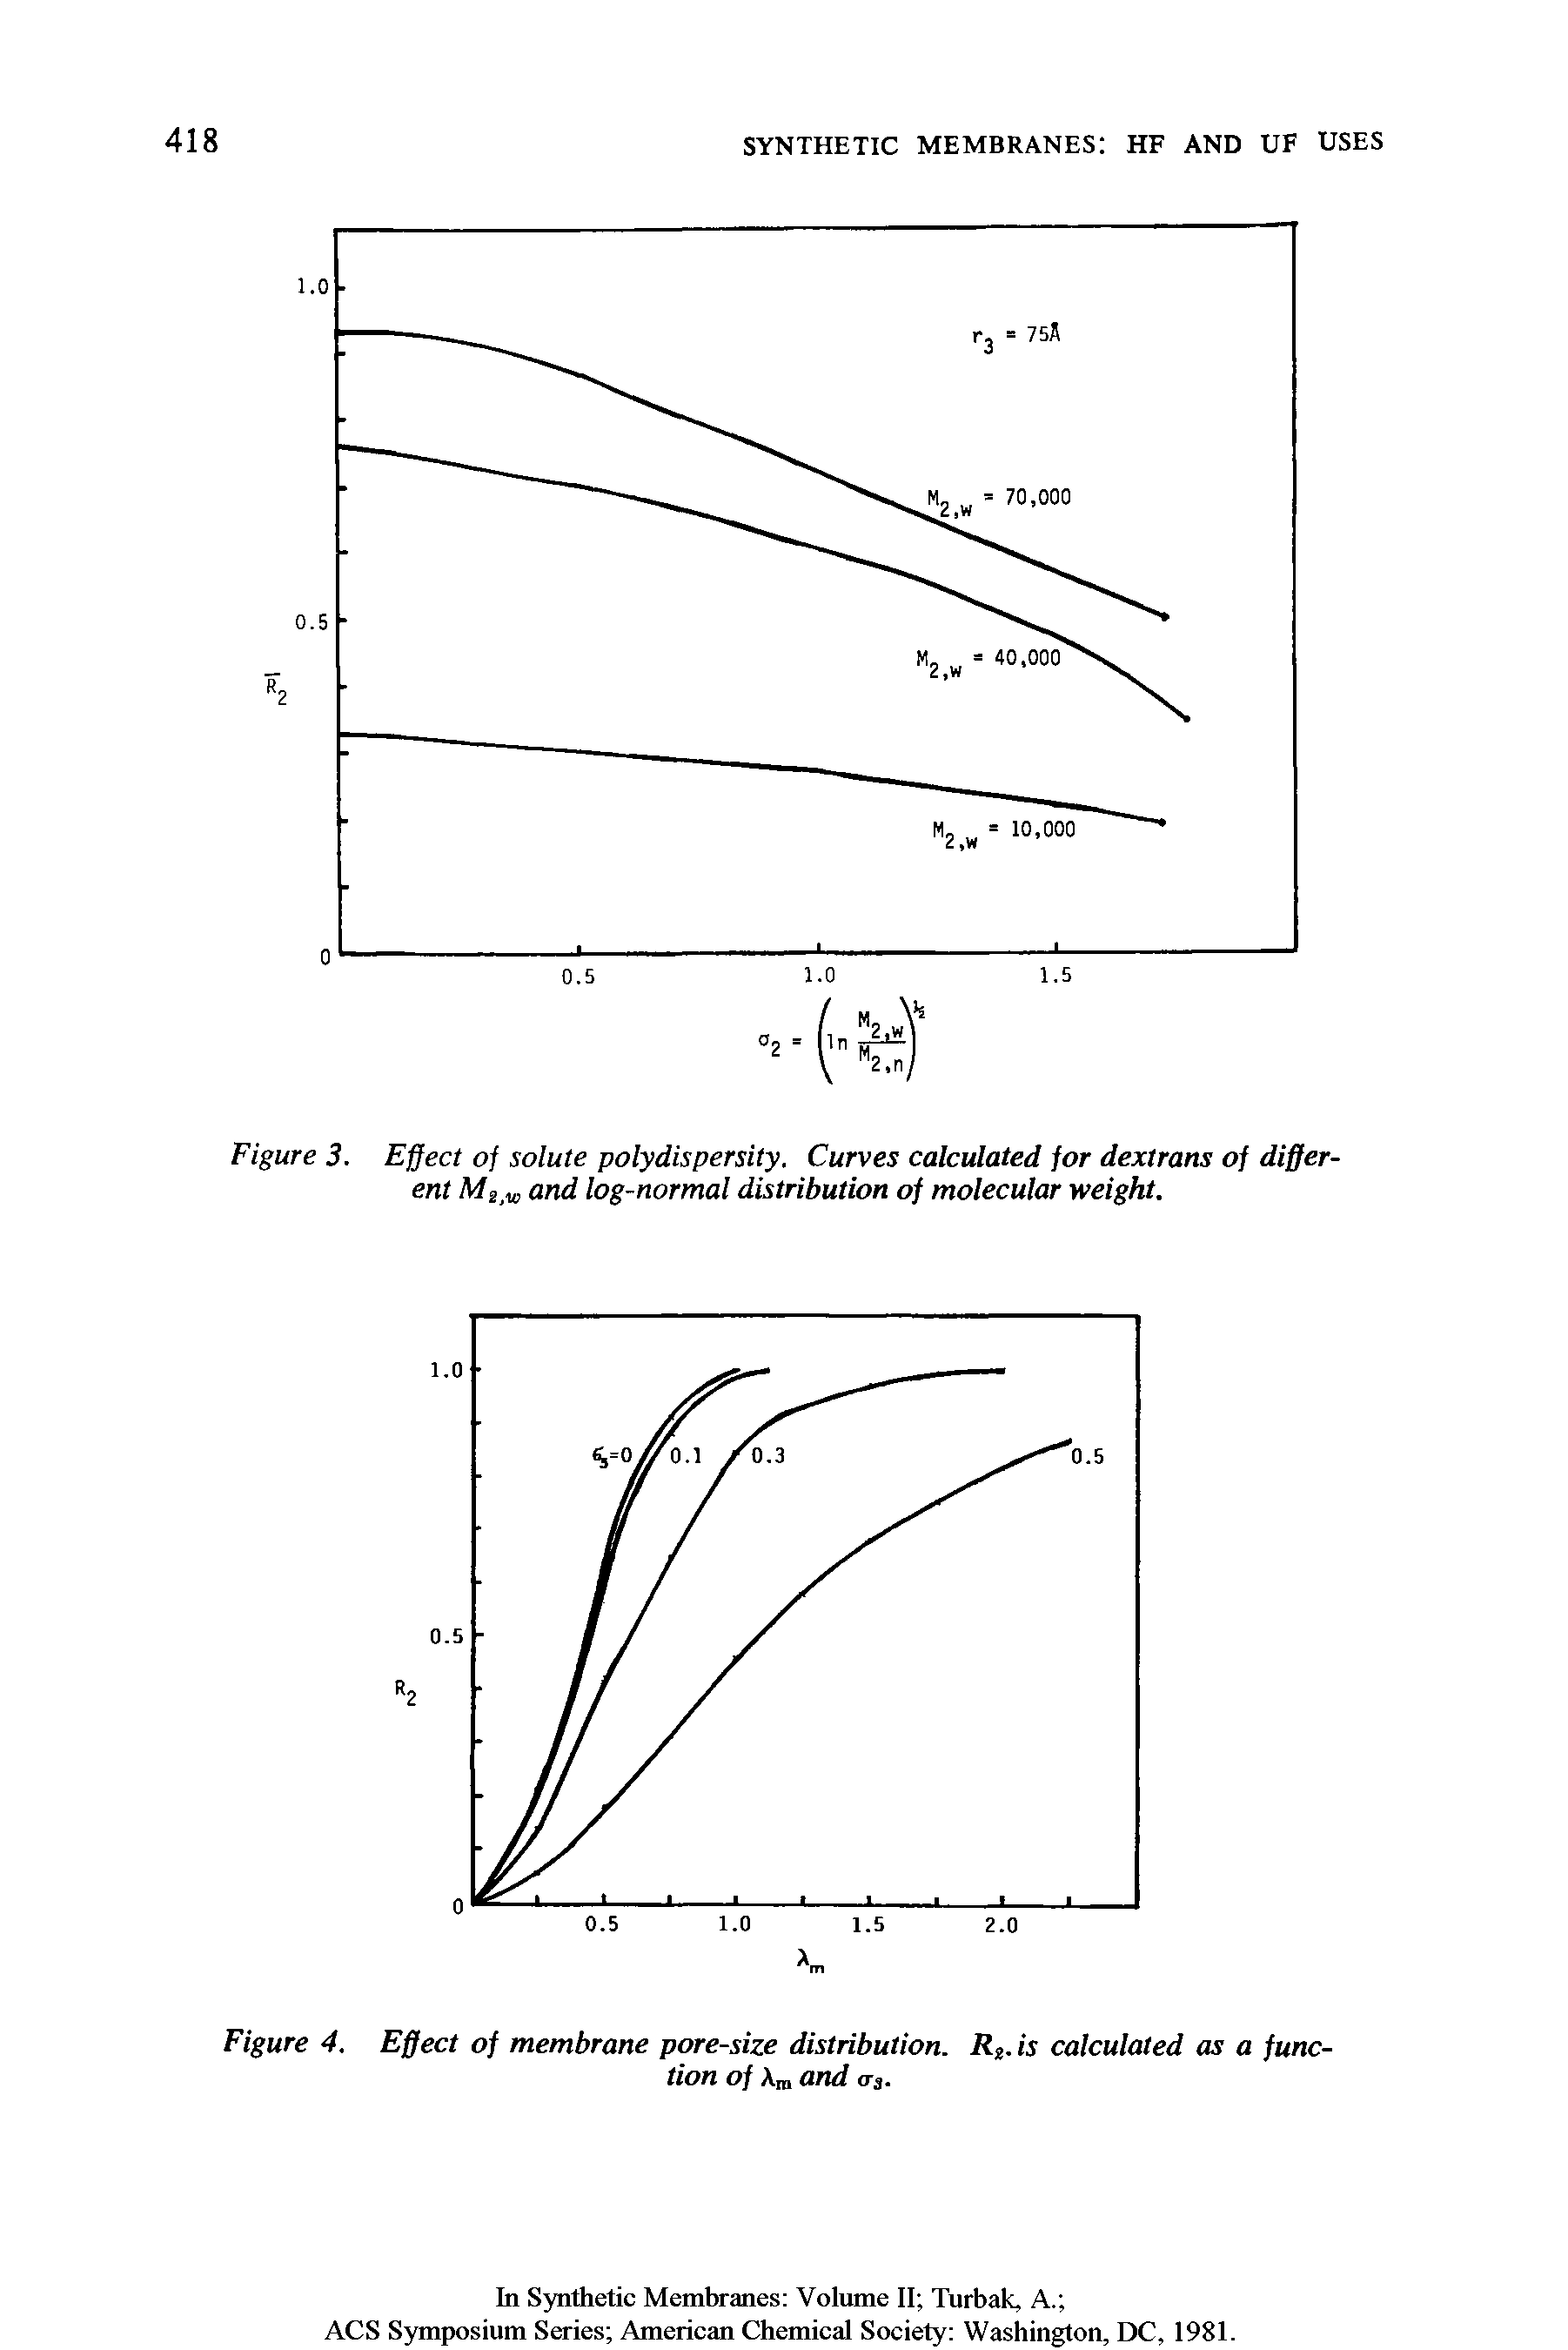 Figure 4. Effect of membrane pore-size distribution. Rs. is calculated as a function of Am and <rj.